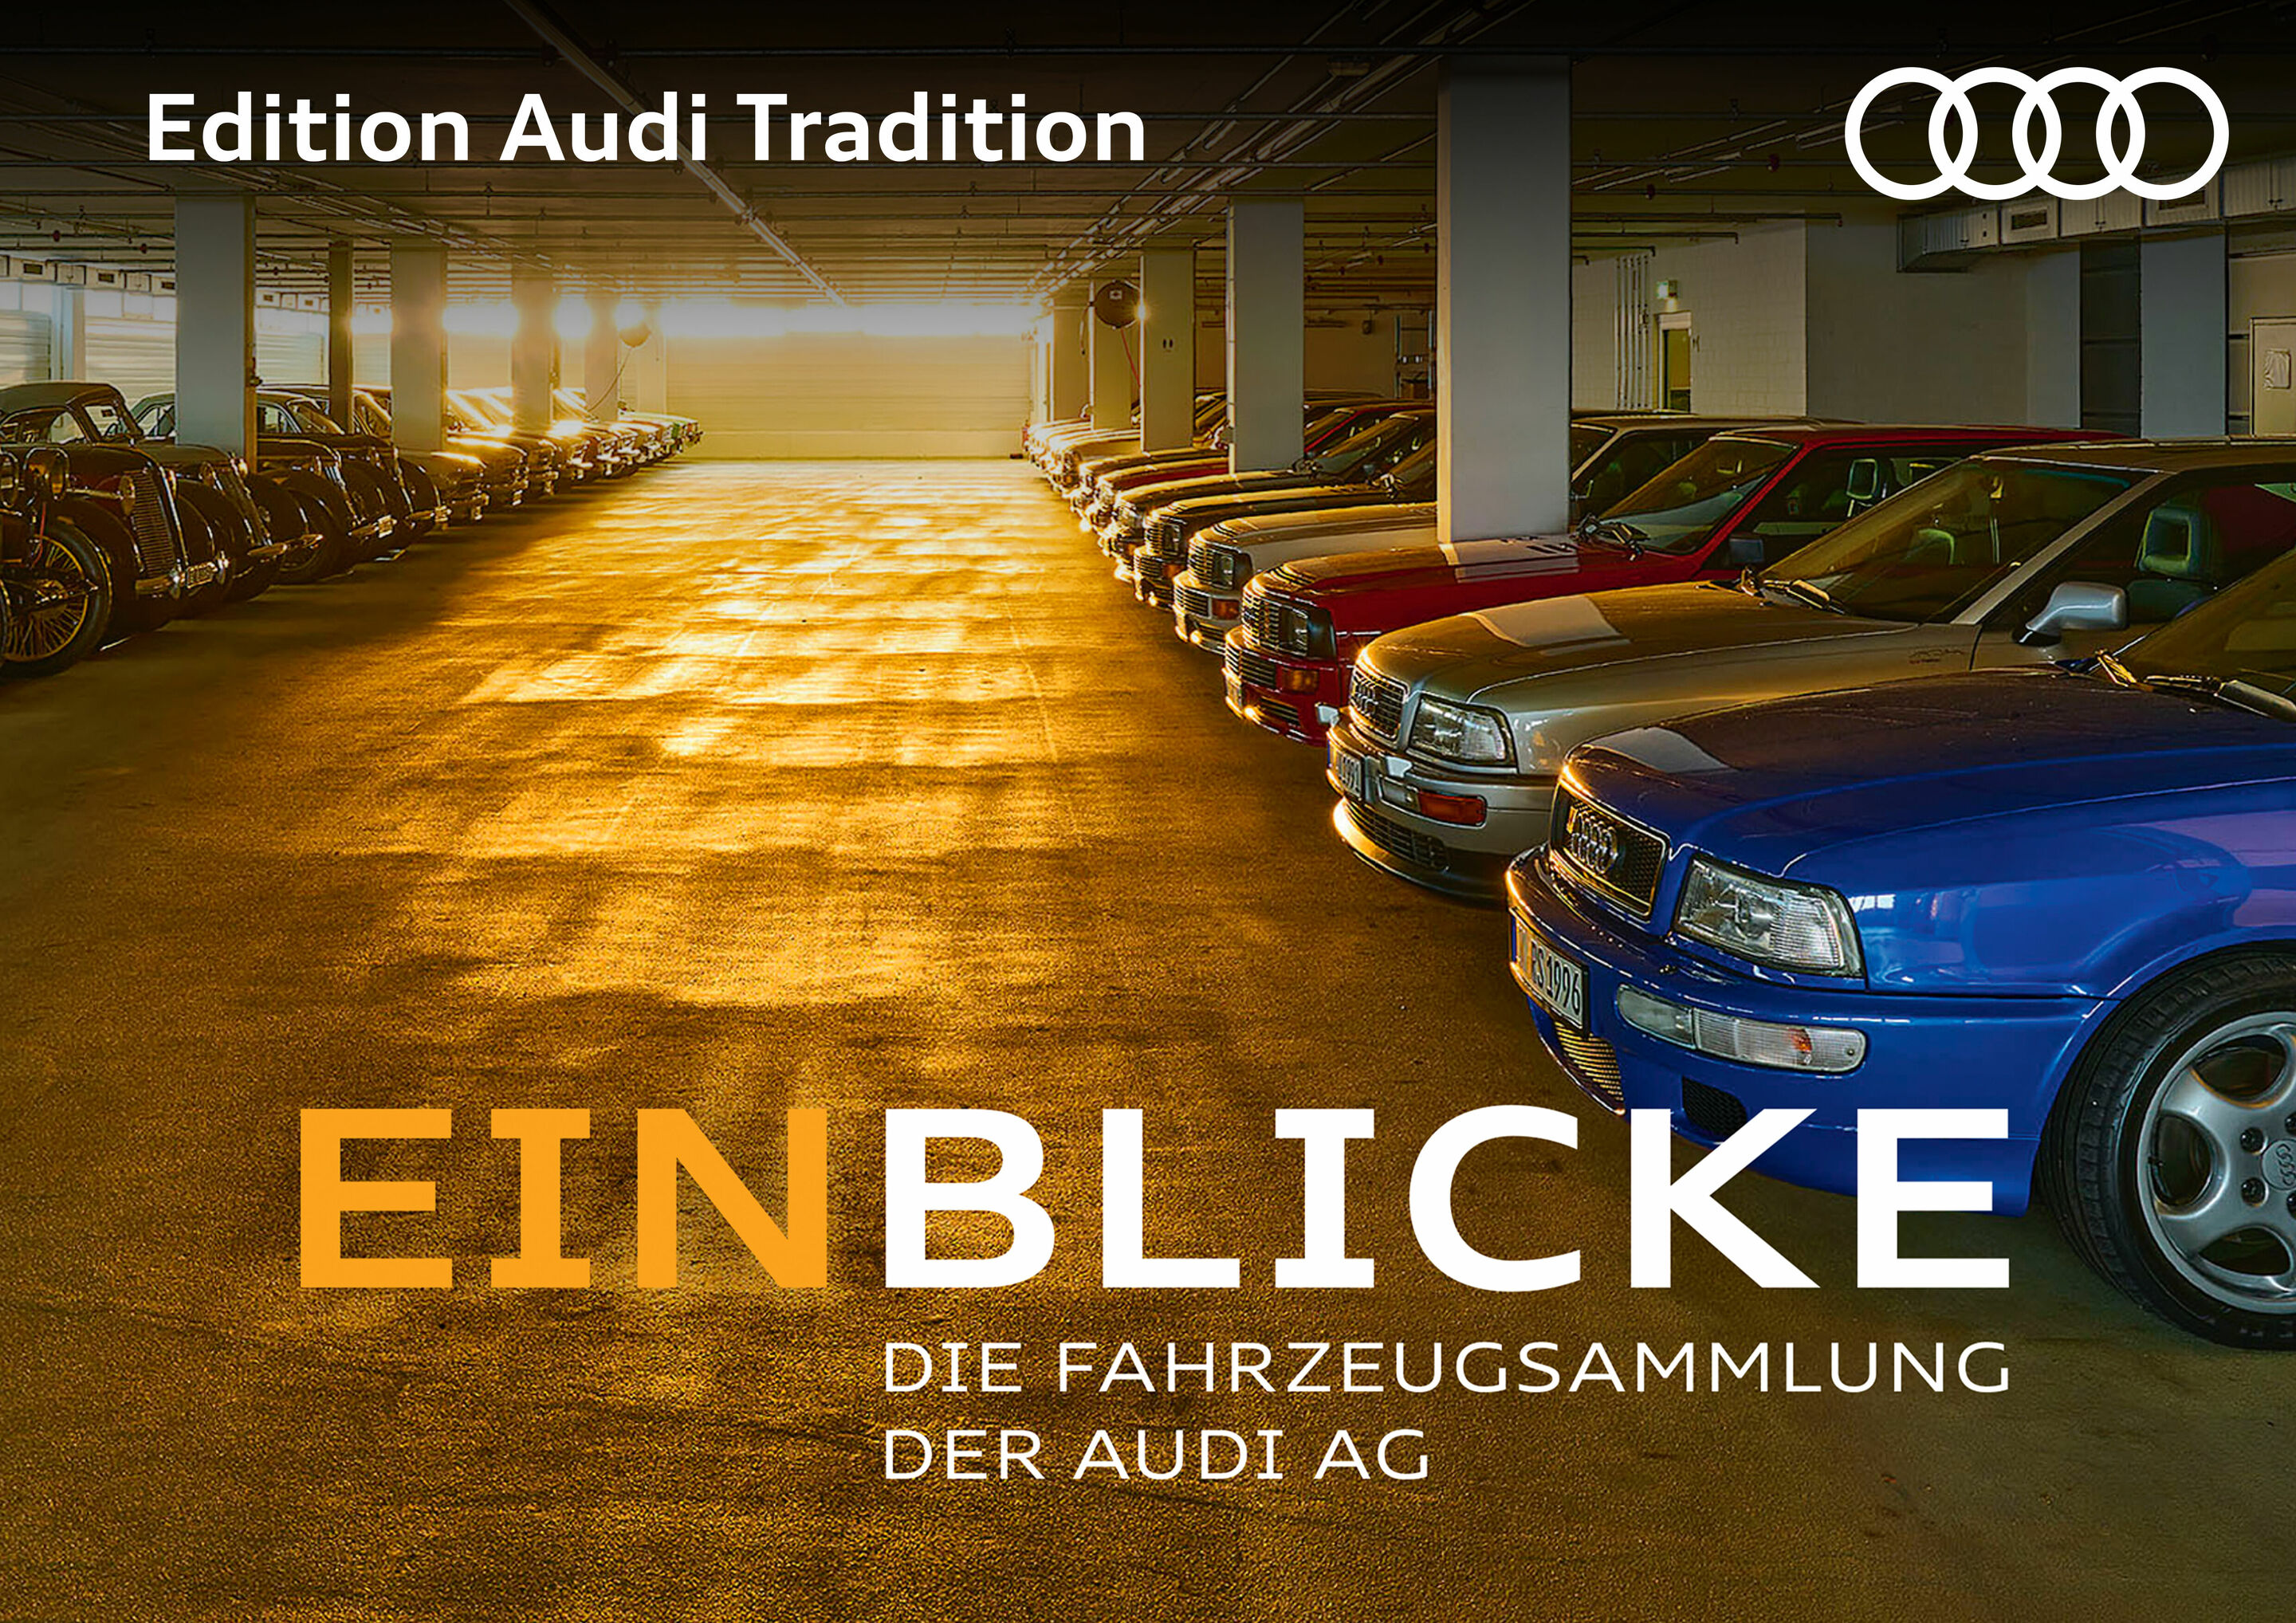 Audi Tradition’s book “insights”